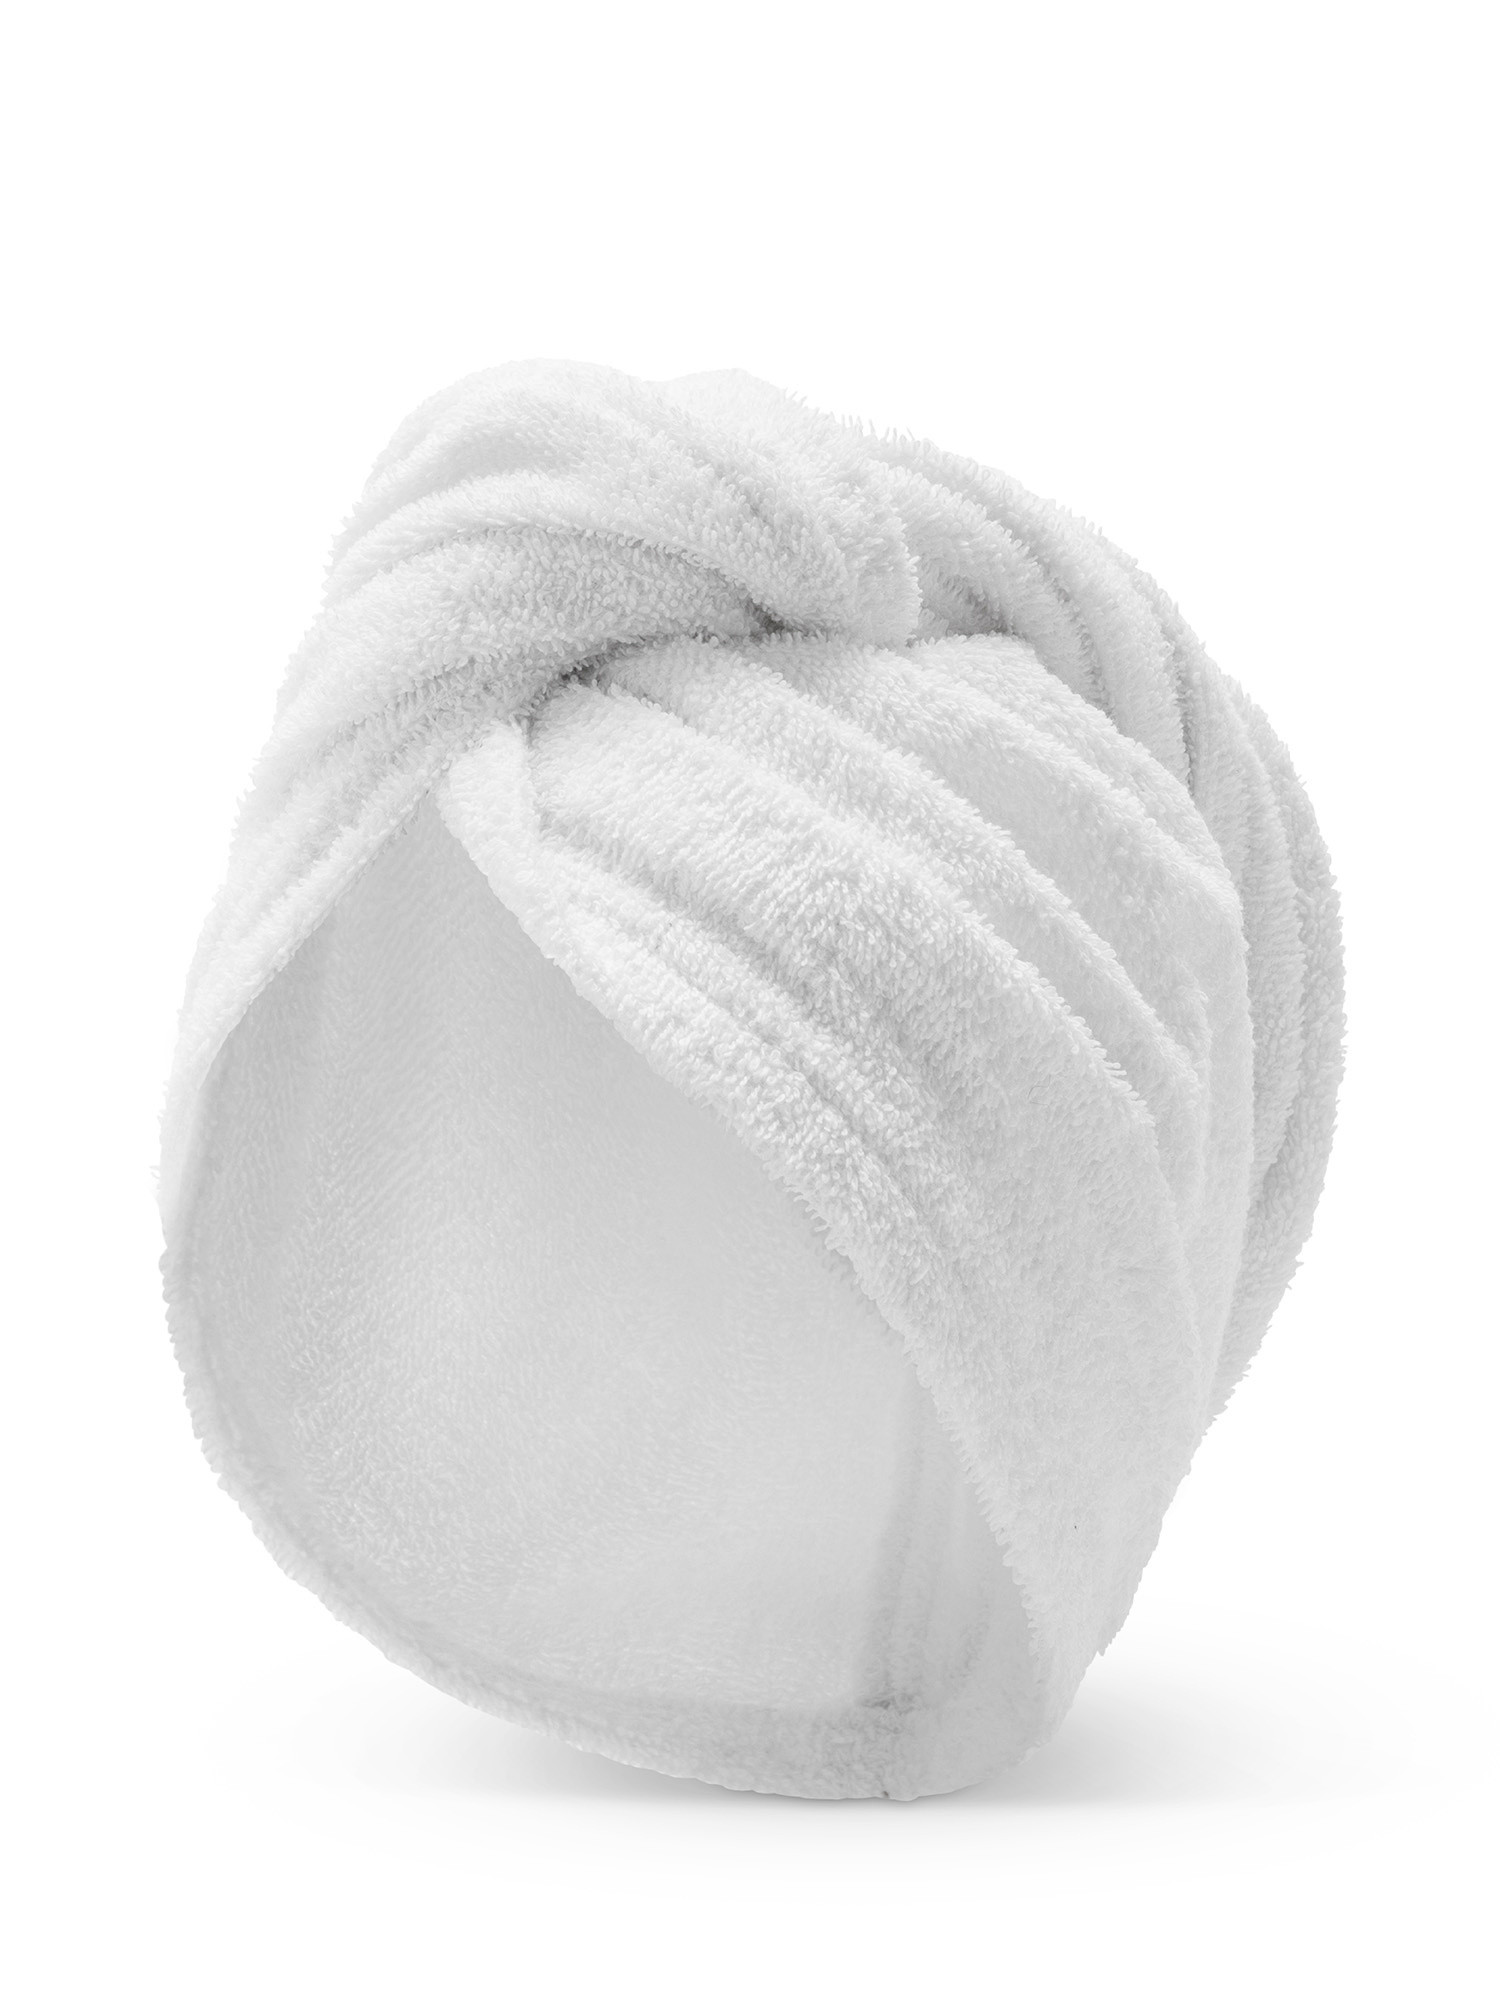 Turban beauty band bath towel set in cotton terry, White, large image number 2